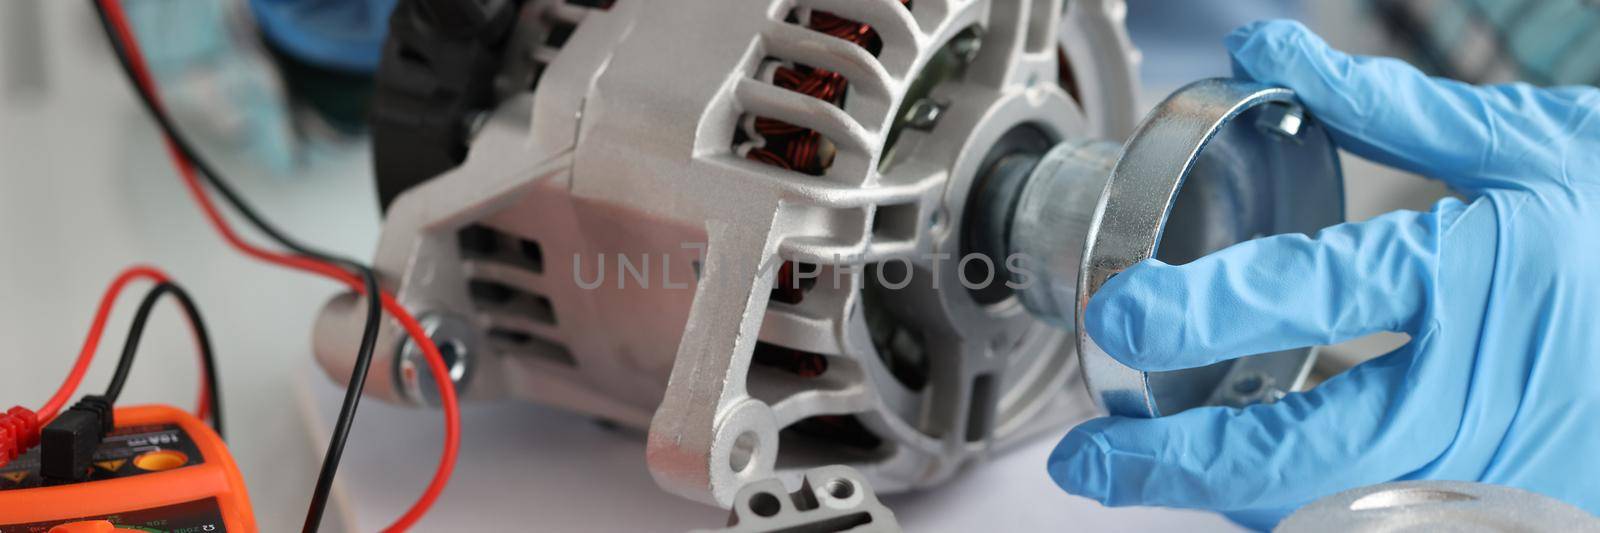 Replacement and testing of alternator and diagnostic equipment closeup by kuprevich